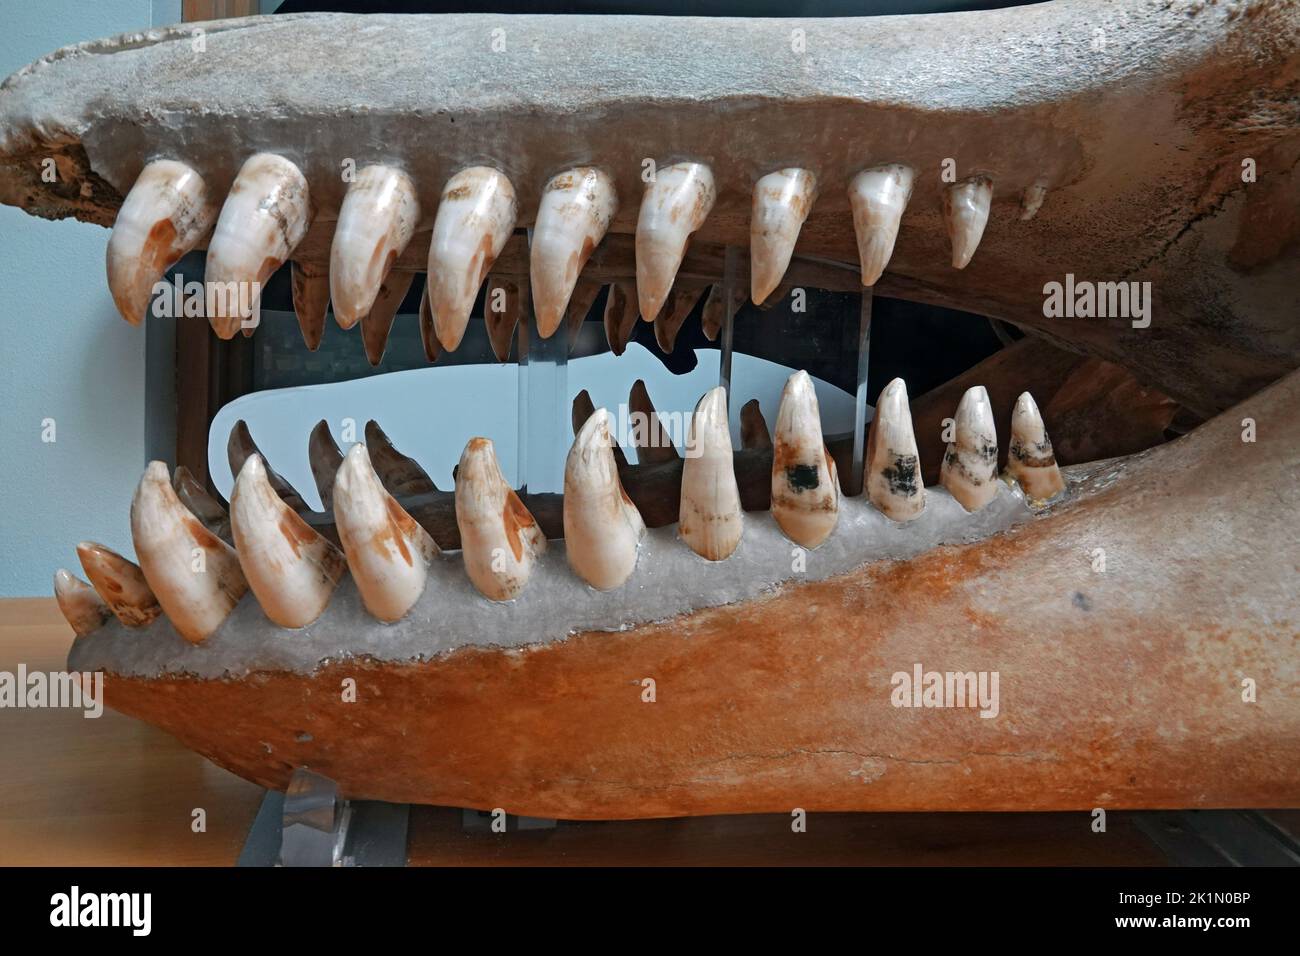 The jaws and teeth of an Orca, or Killer Whale, on display at the Hartfield Marine Science Center in Newport, Oregon. Stock Photo